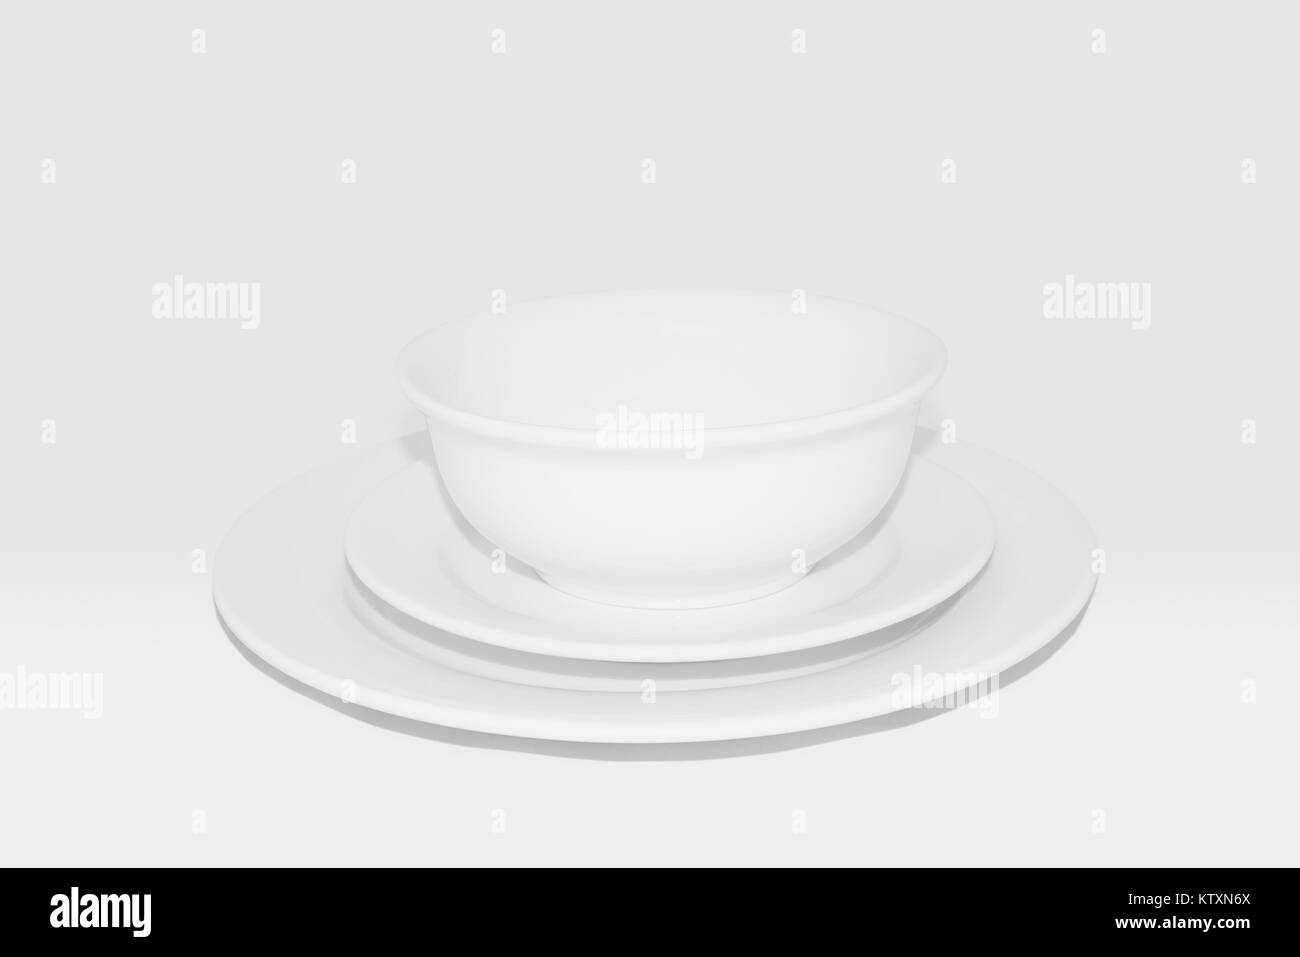 Crockery set including dinner plate, side plate and bowl: White crockery against a white background,100% grayscale. Stock Photo